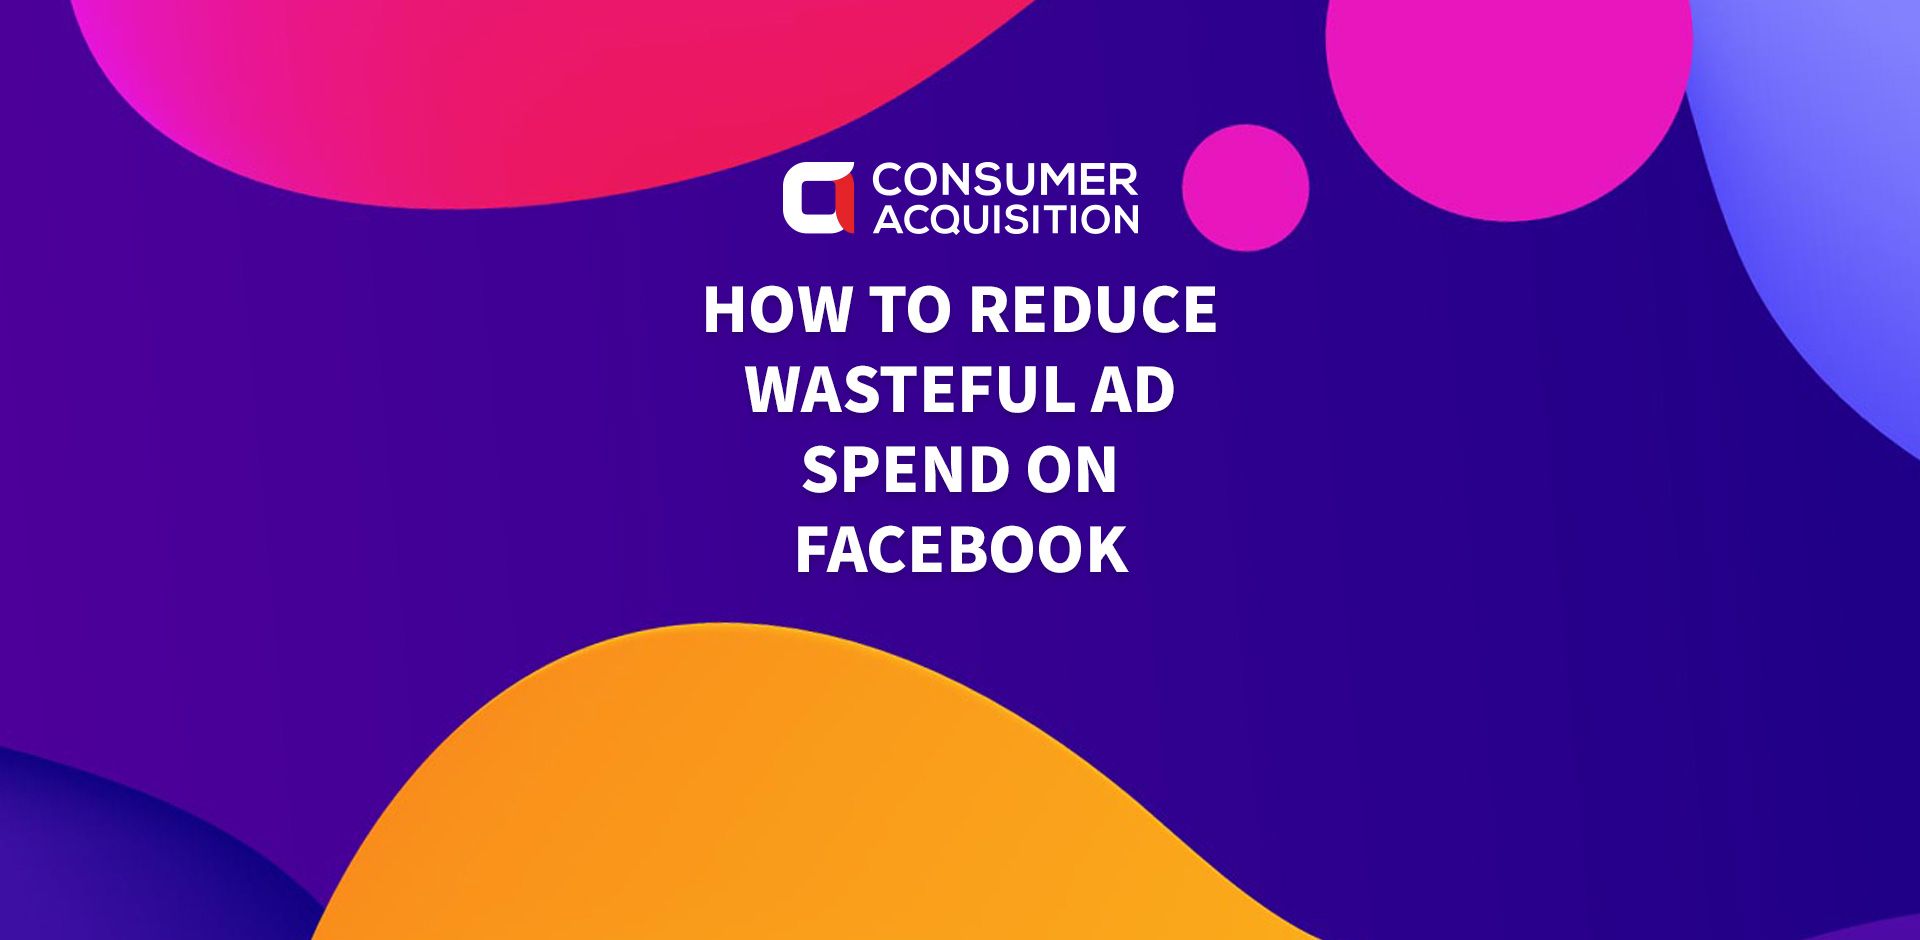 How to Reduce Wasteful Ad Spend on Facebook